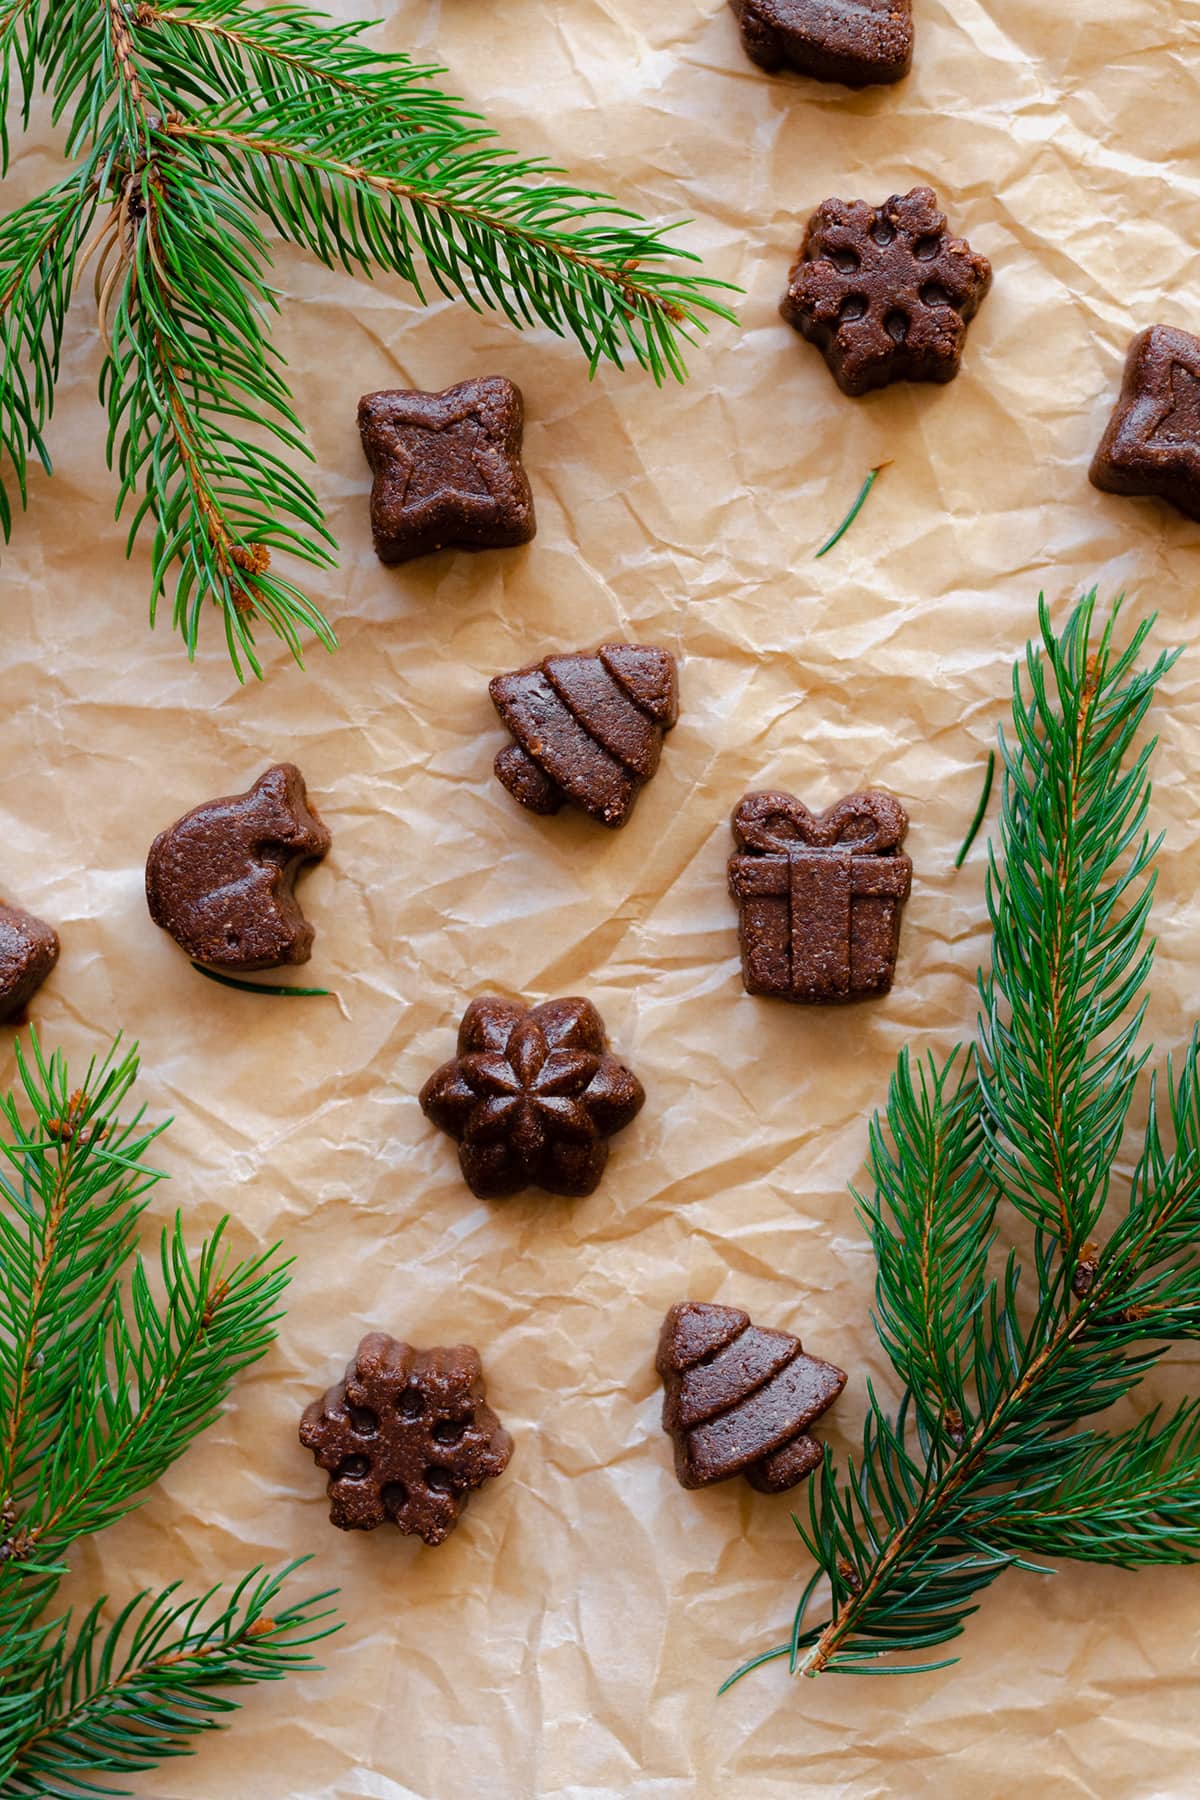 Chocolate Hazelnut Fudge Bites laid out on parchment paper, with fir twigs around the bites.